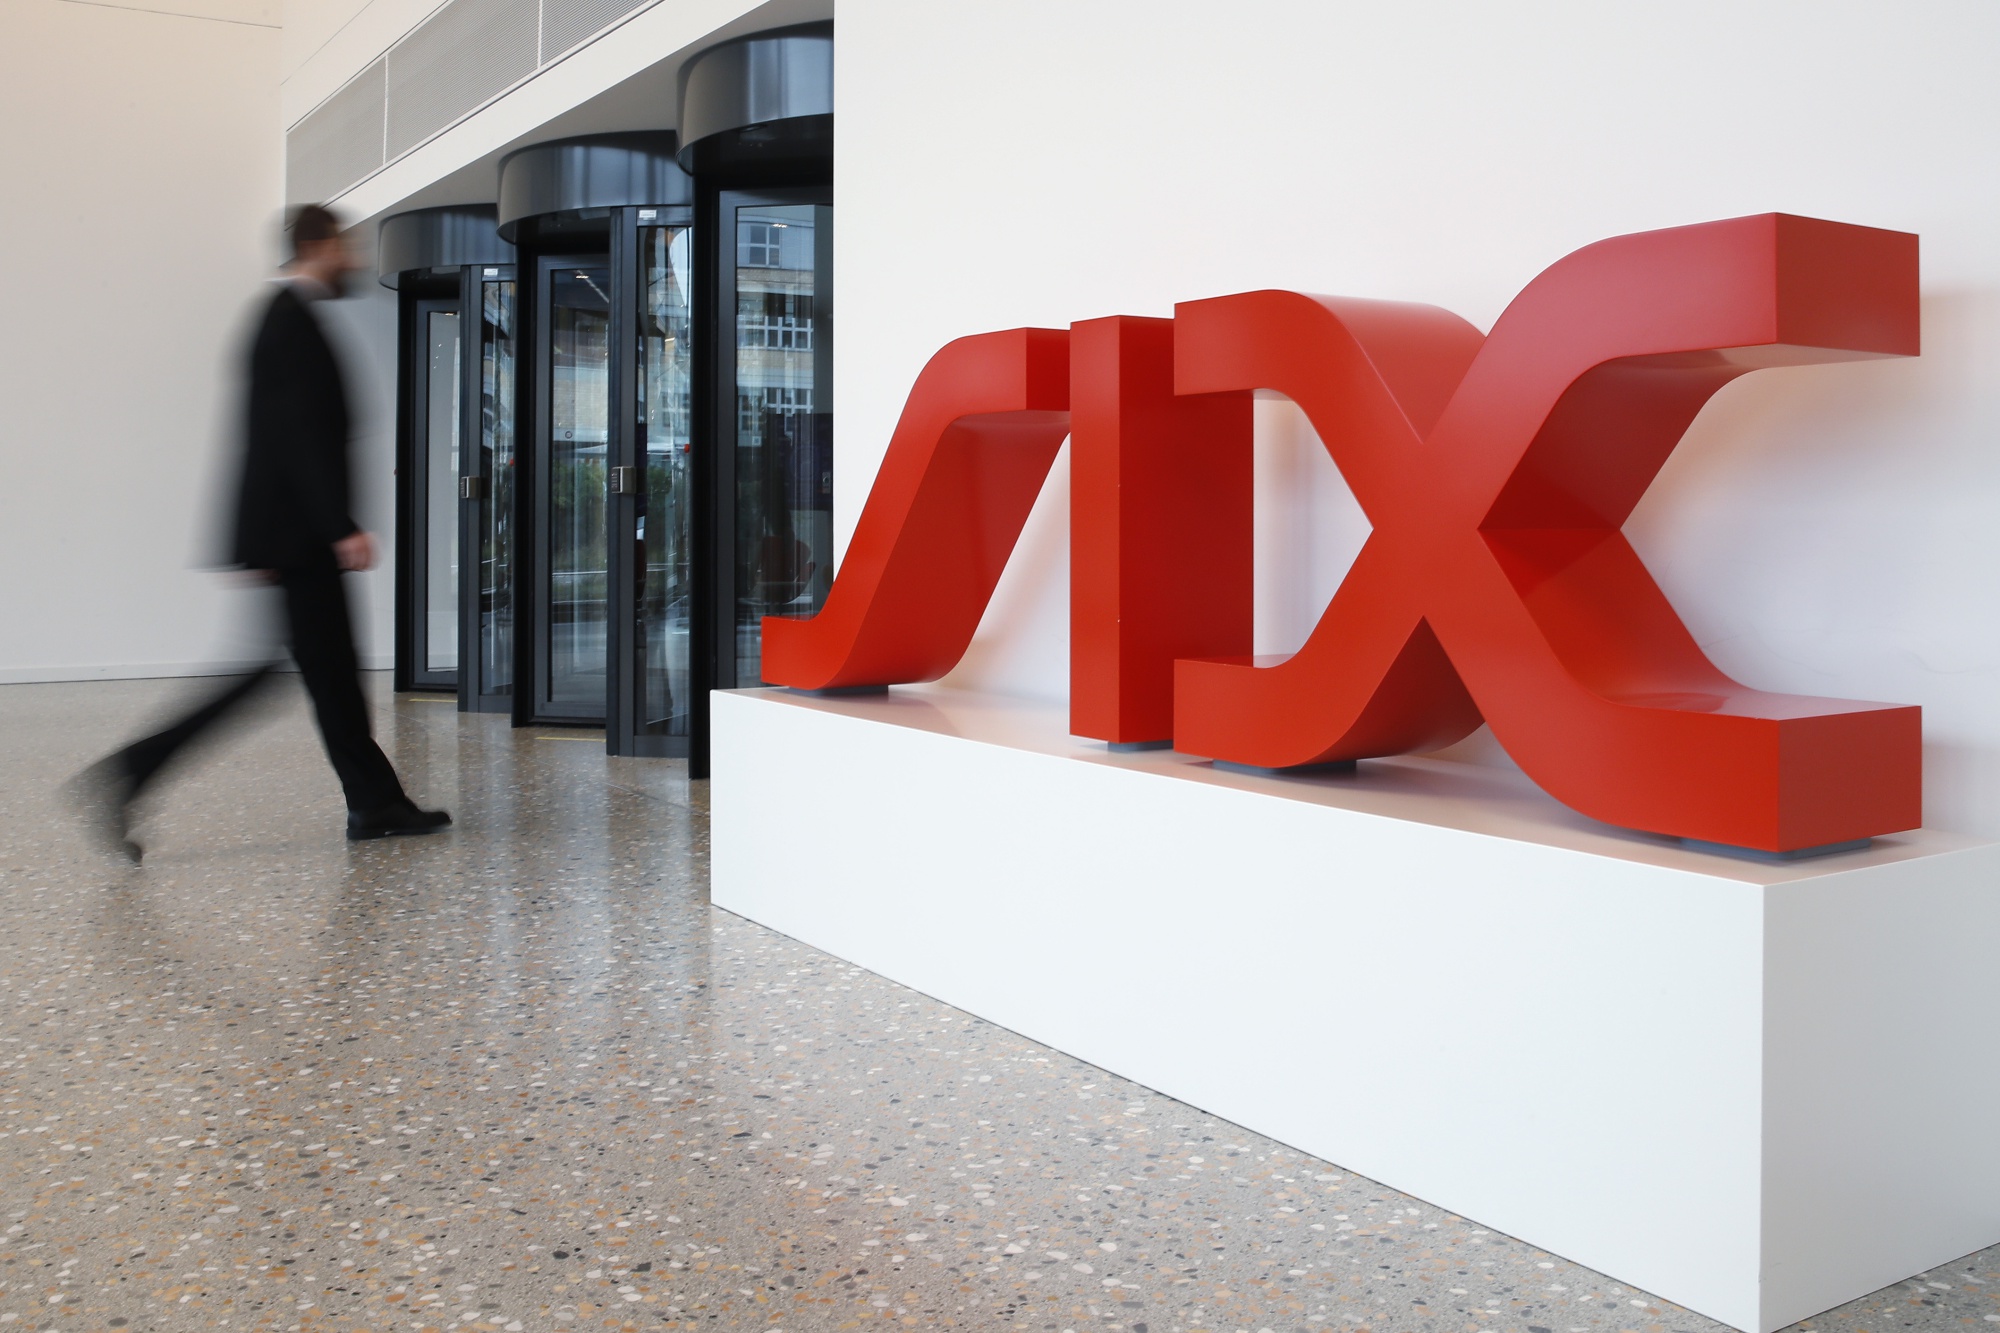 A SIX logo sits in the entrance hall of the Six Swiss Exchange AG in Zurich.